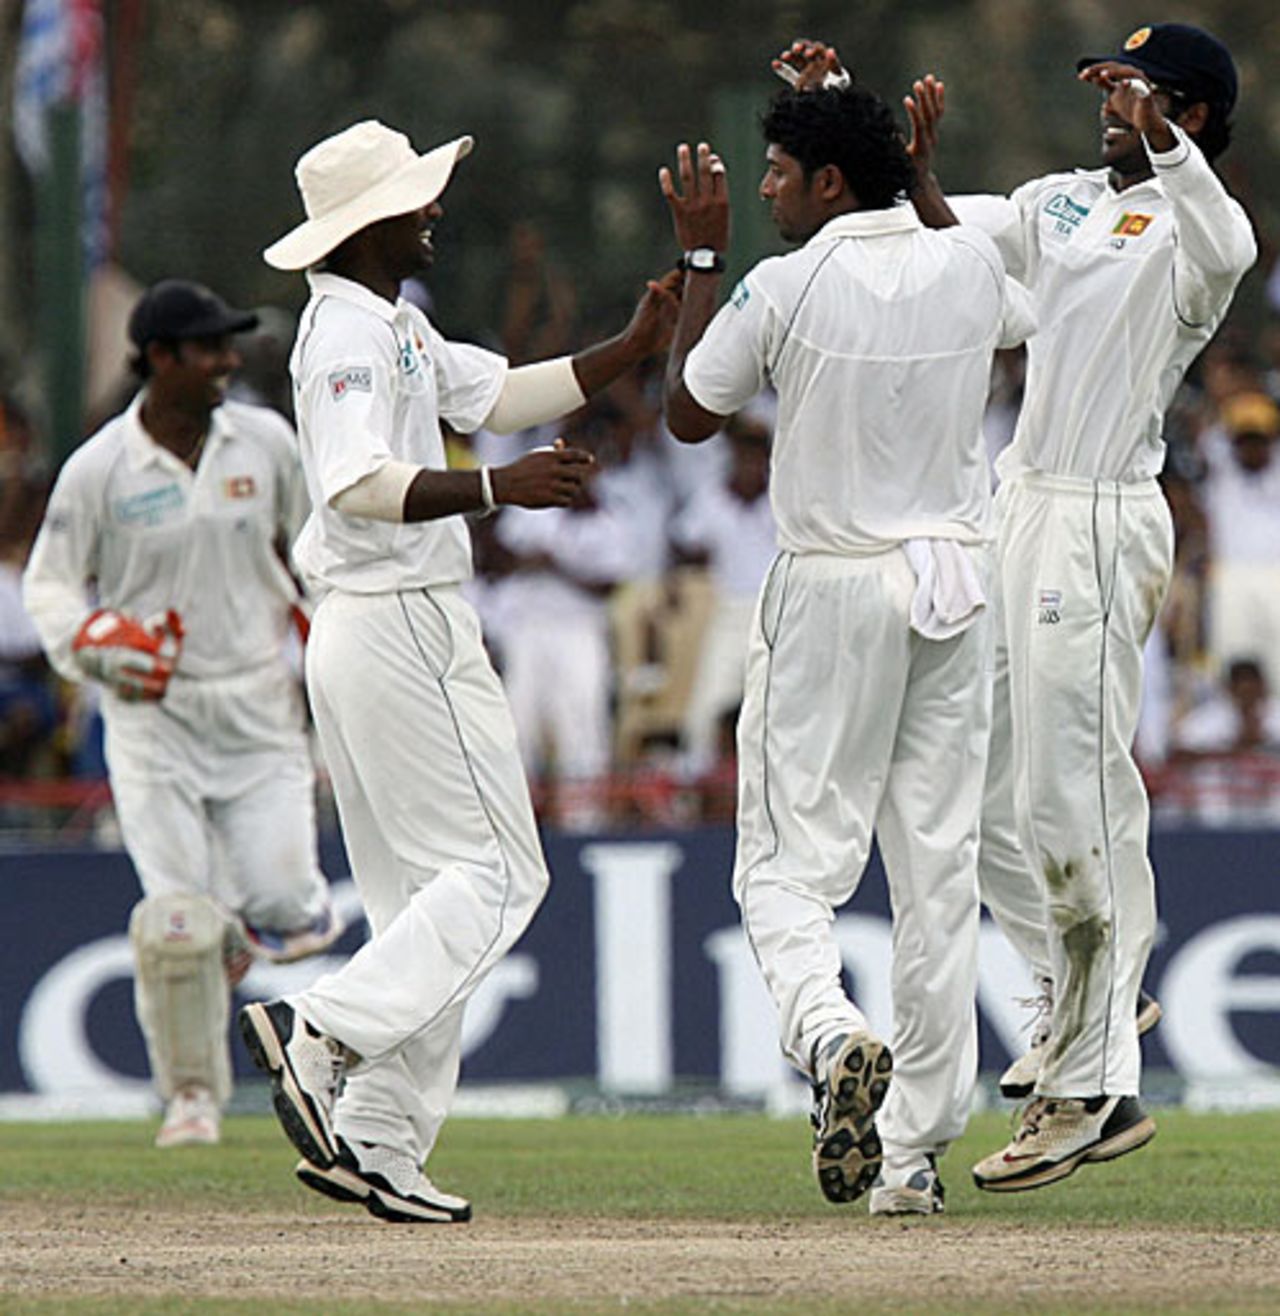 Chanaka Welegedara is congratulated on the wicket of Michael Vaughan, Sri Lanka v England, 3rd Test, Galle, 4th day, December 21, 2007